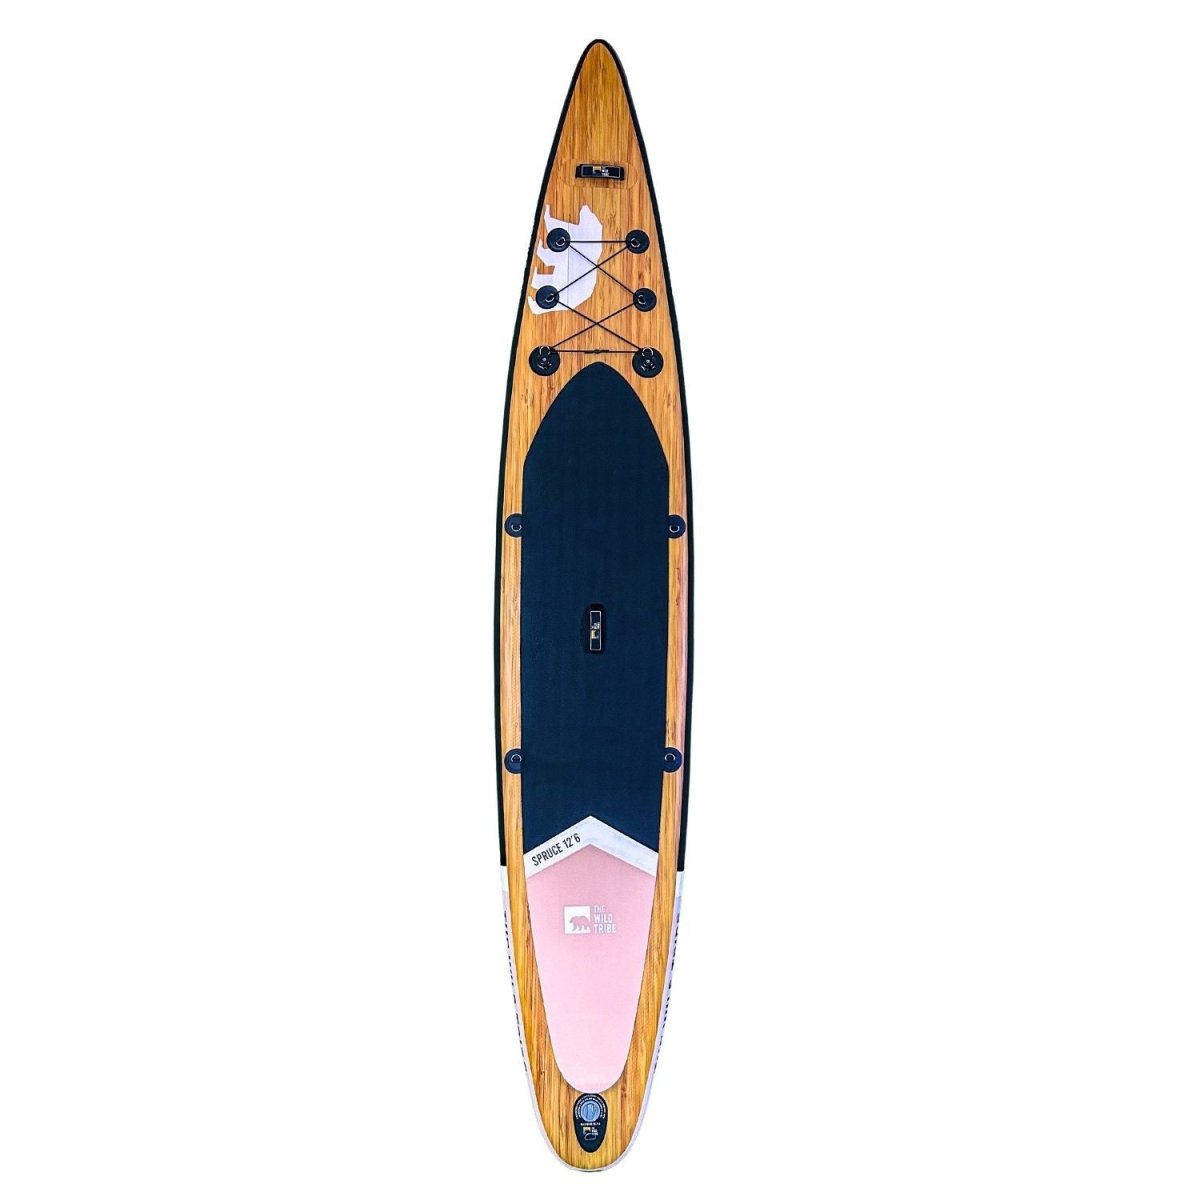 Spruce 12'6 Salmon: Racing 12'6" Premium Inflatable Paddleboard - The Wild Tribe